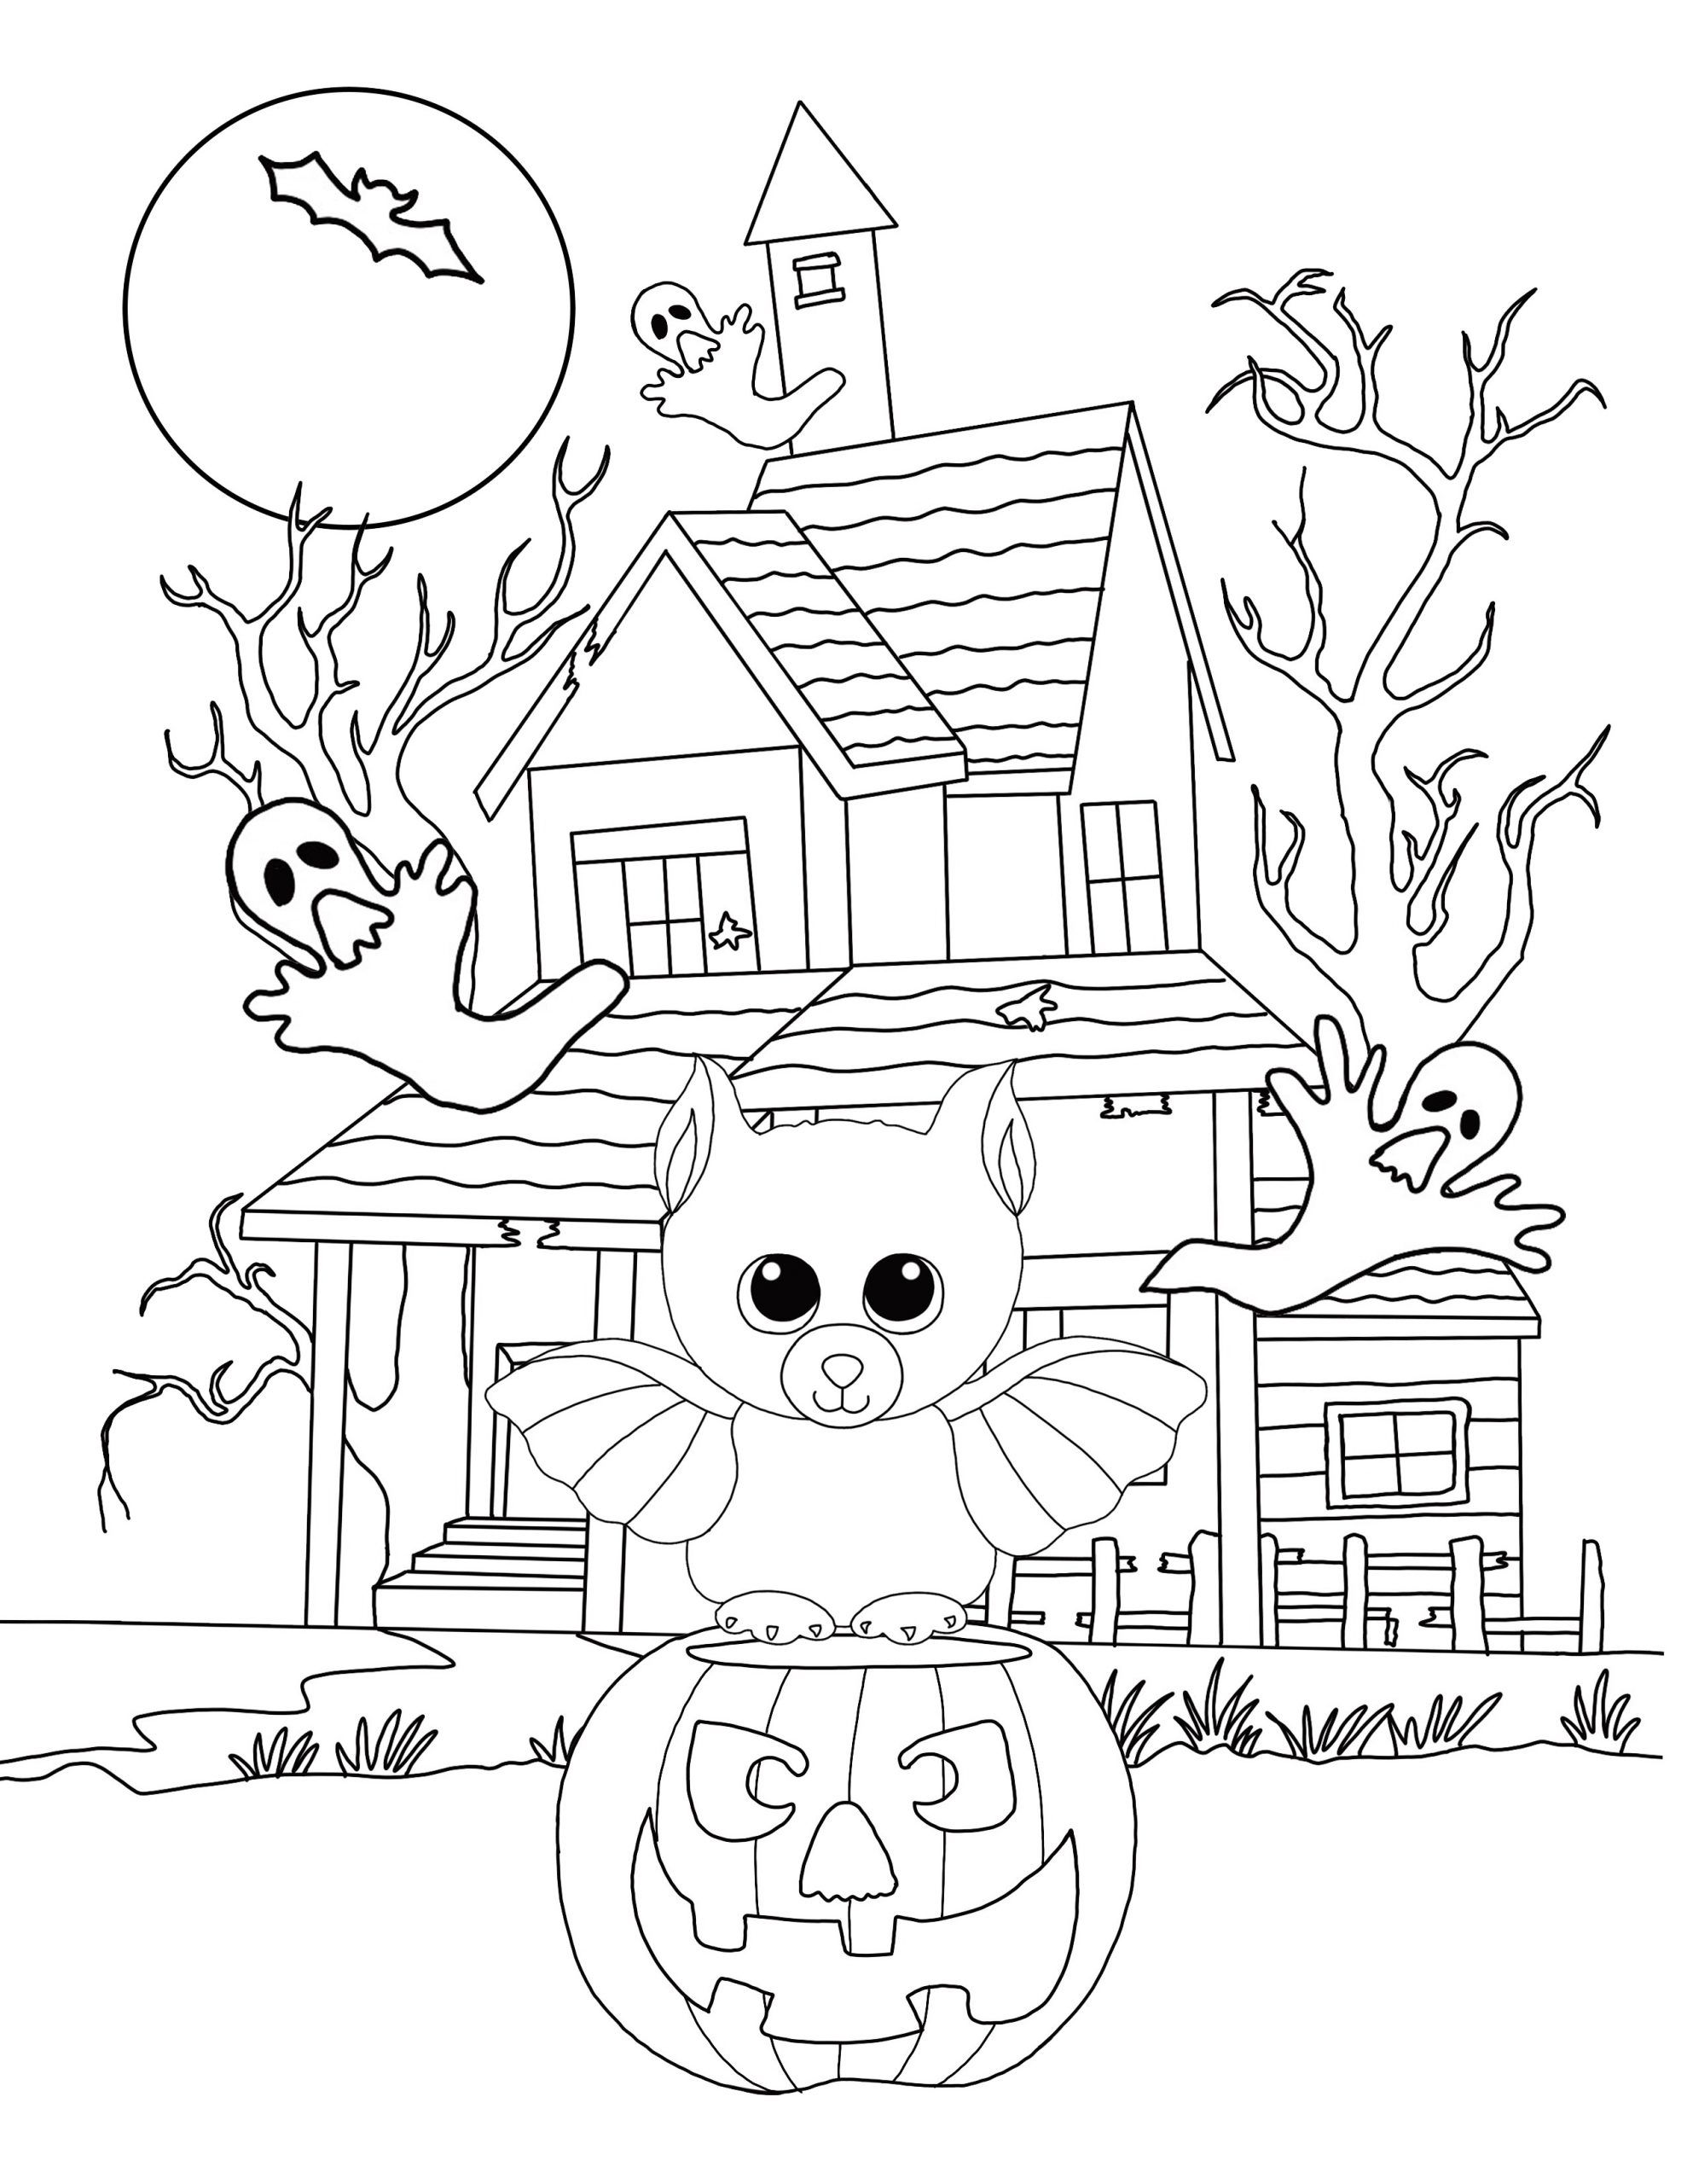 Awesome Coloring Picture Of Beanie Boos Image Ideas Boo Halloween Page Bat Free Pages Download Print Cats Dogs And Unicorn Rainbow Wallpaper